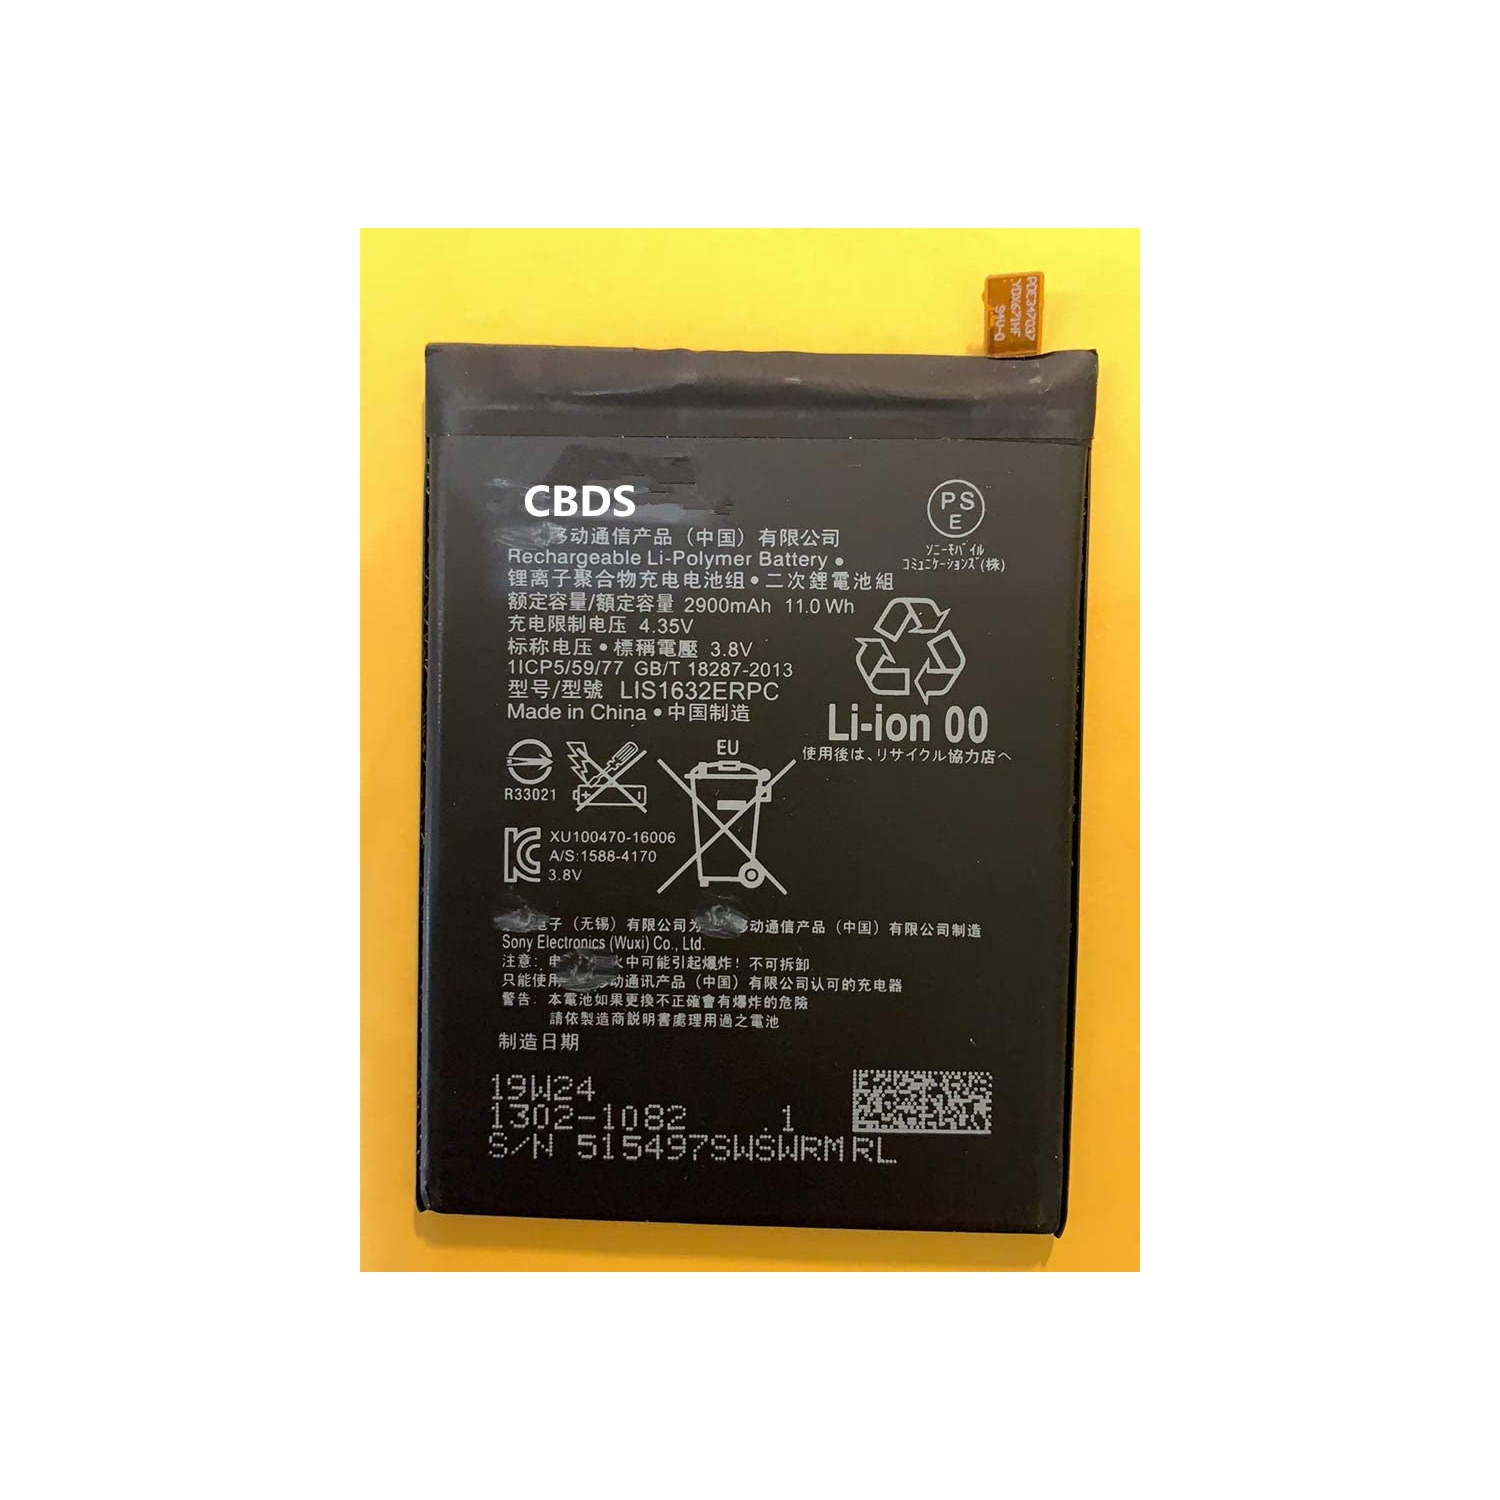 (CBDS) 2900mAh, 11.0 Wh Replacement Battery - Compatible with Sony Xperia XZ F8331 F8332 LIS1632ERPC in Non-Retail